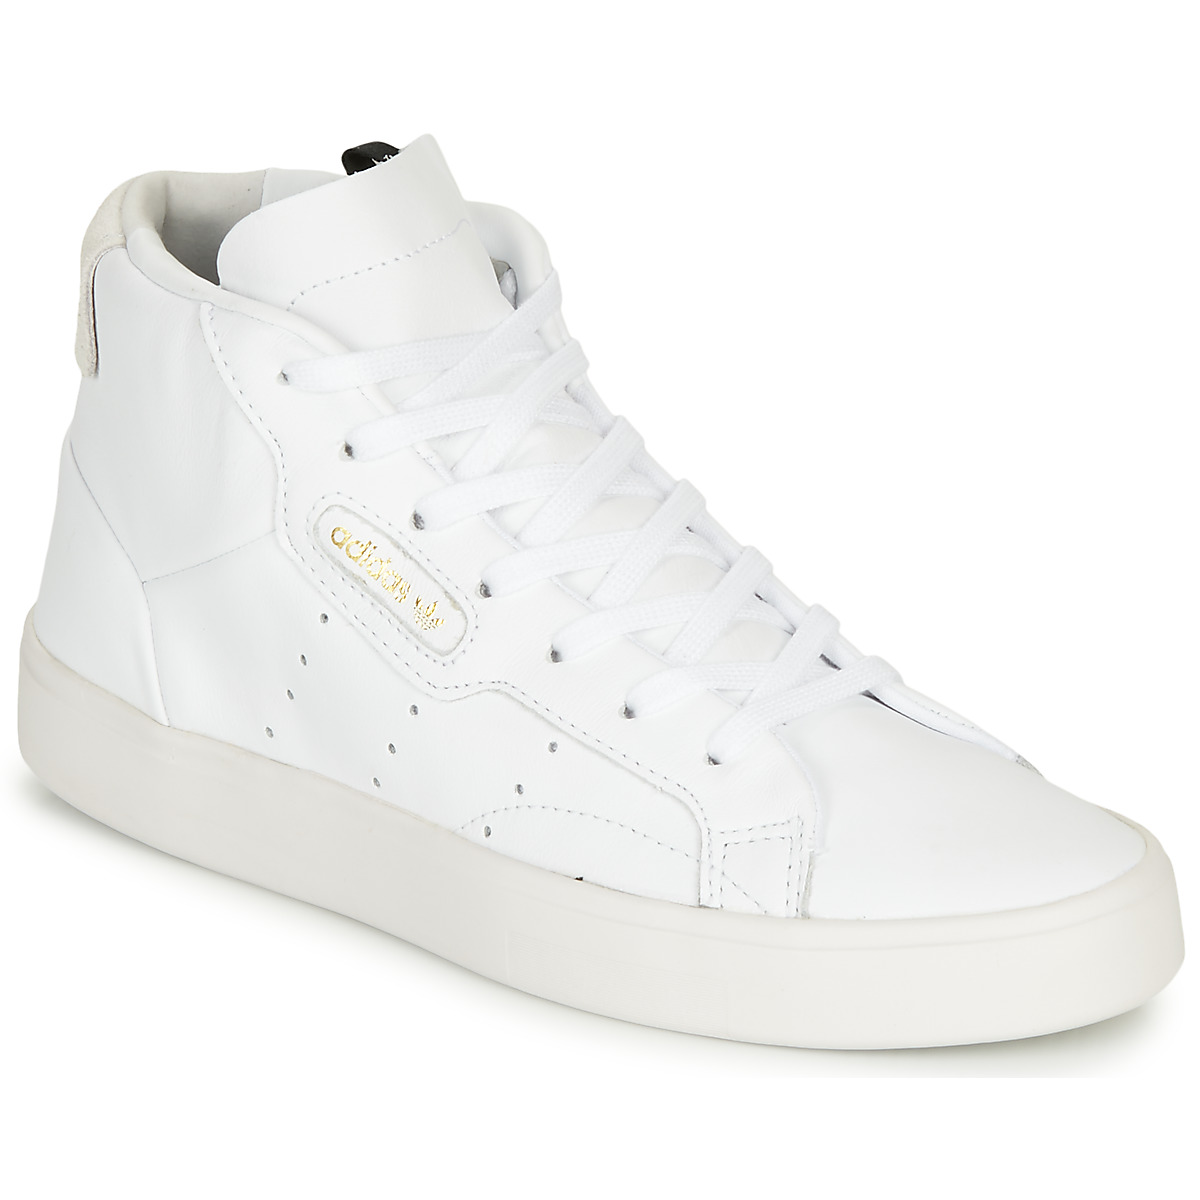 adidas originals sleek mid top trainers in white and grey